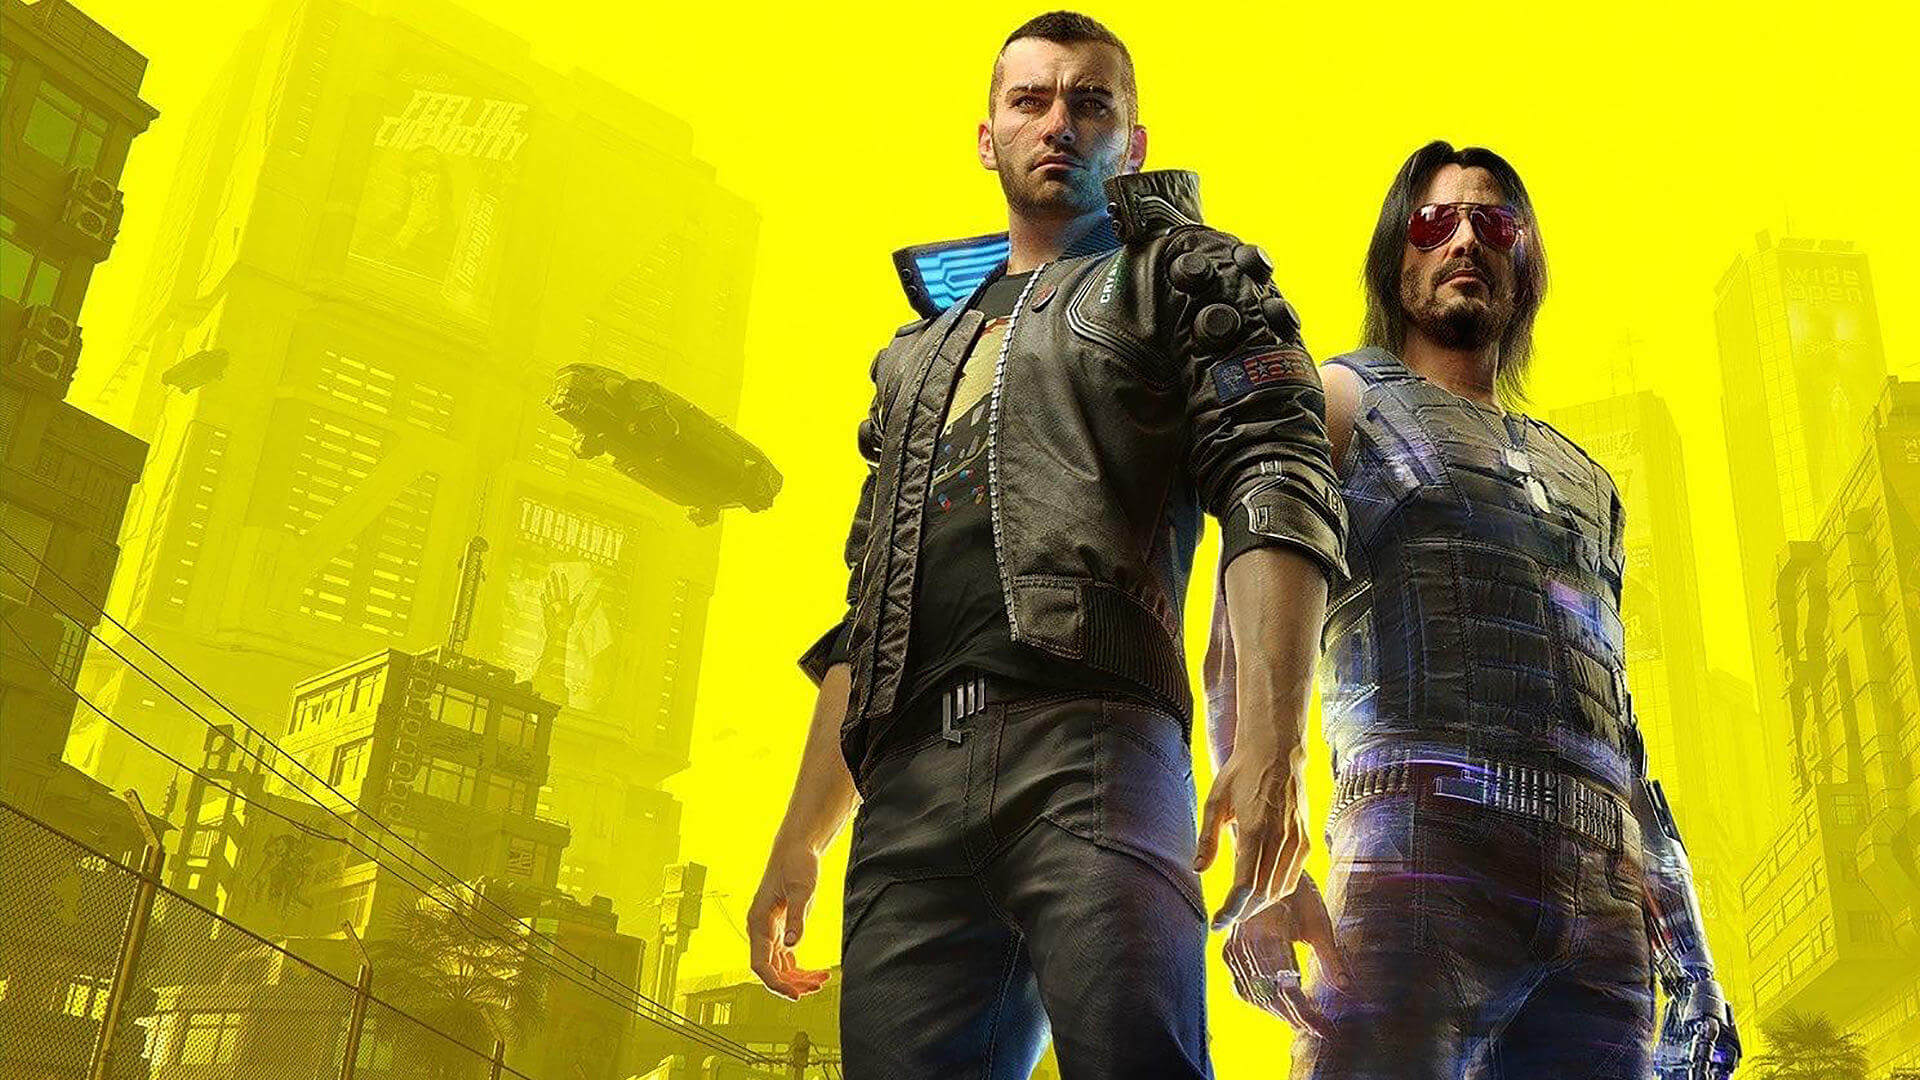 Cyberpunk 2077 Review - Livin' it Up in Night City